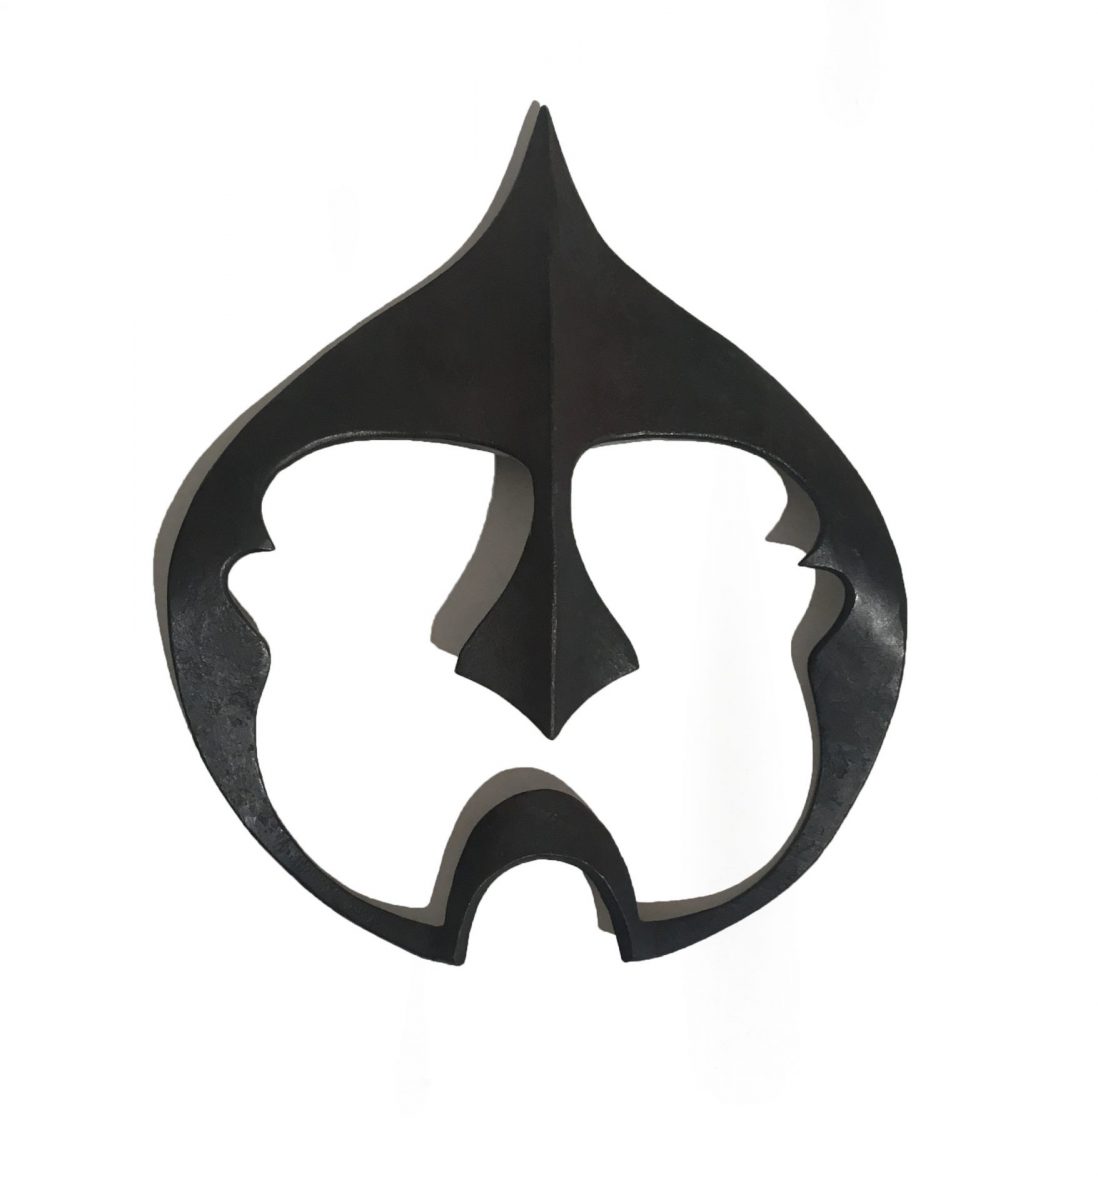 019.WILL-MAGUIRE-Iron-Mask-4.-26-x-23cm-forged-steel-angle-iron-$-690.00